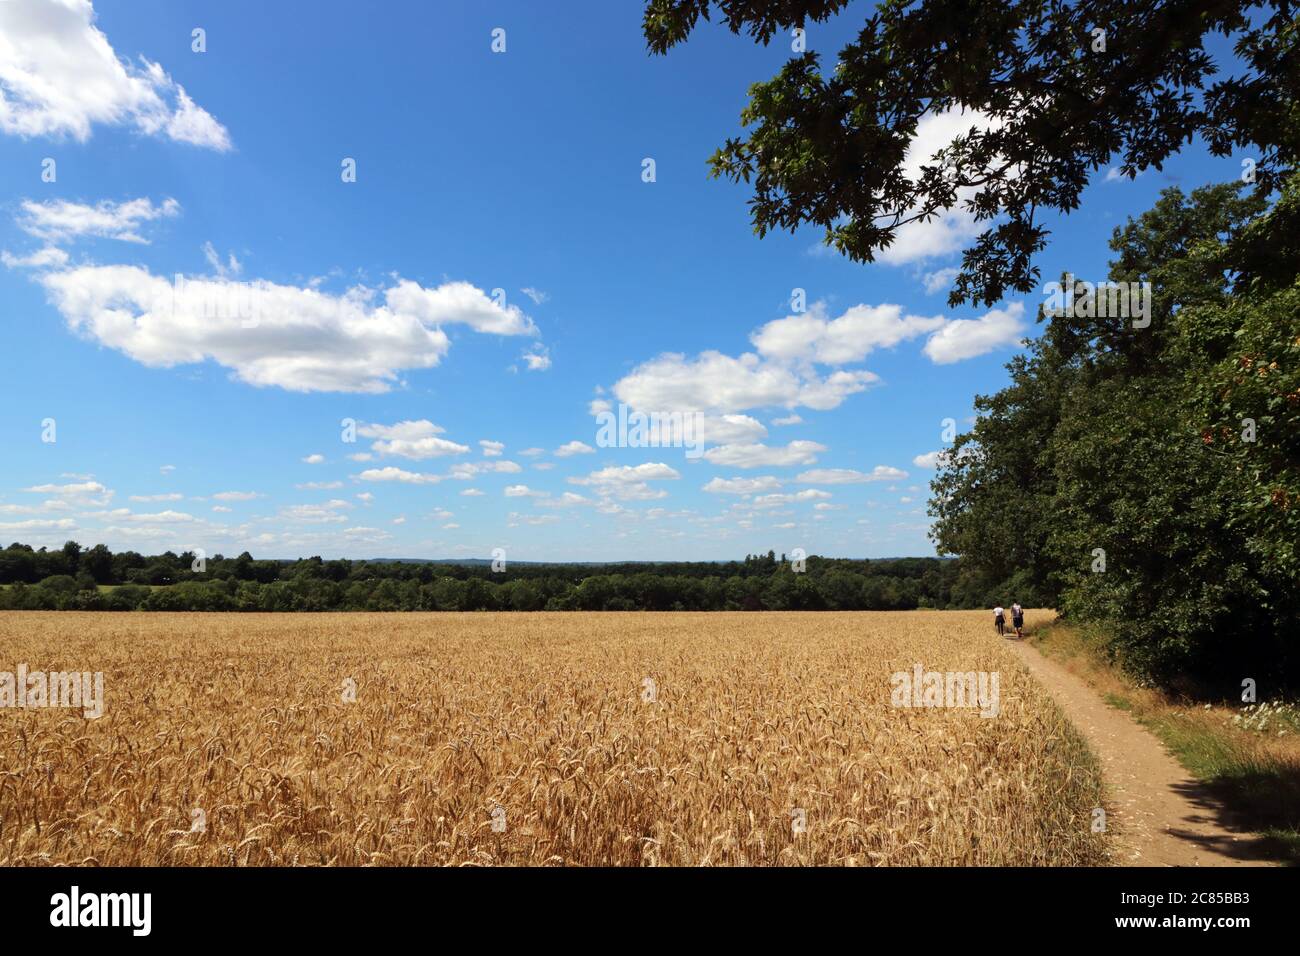 Ashtead Surrey England, UK. 21st July, 2020. The midday sun beats down on a field of ripening wheat on another glorious summers day in Surrey. Credit: Julia Gavin/Alamy Live News Stock Photo